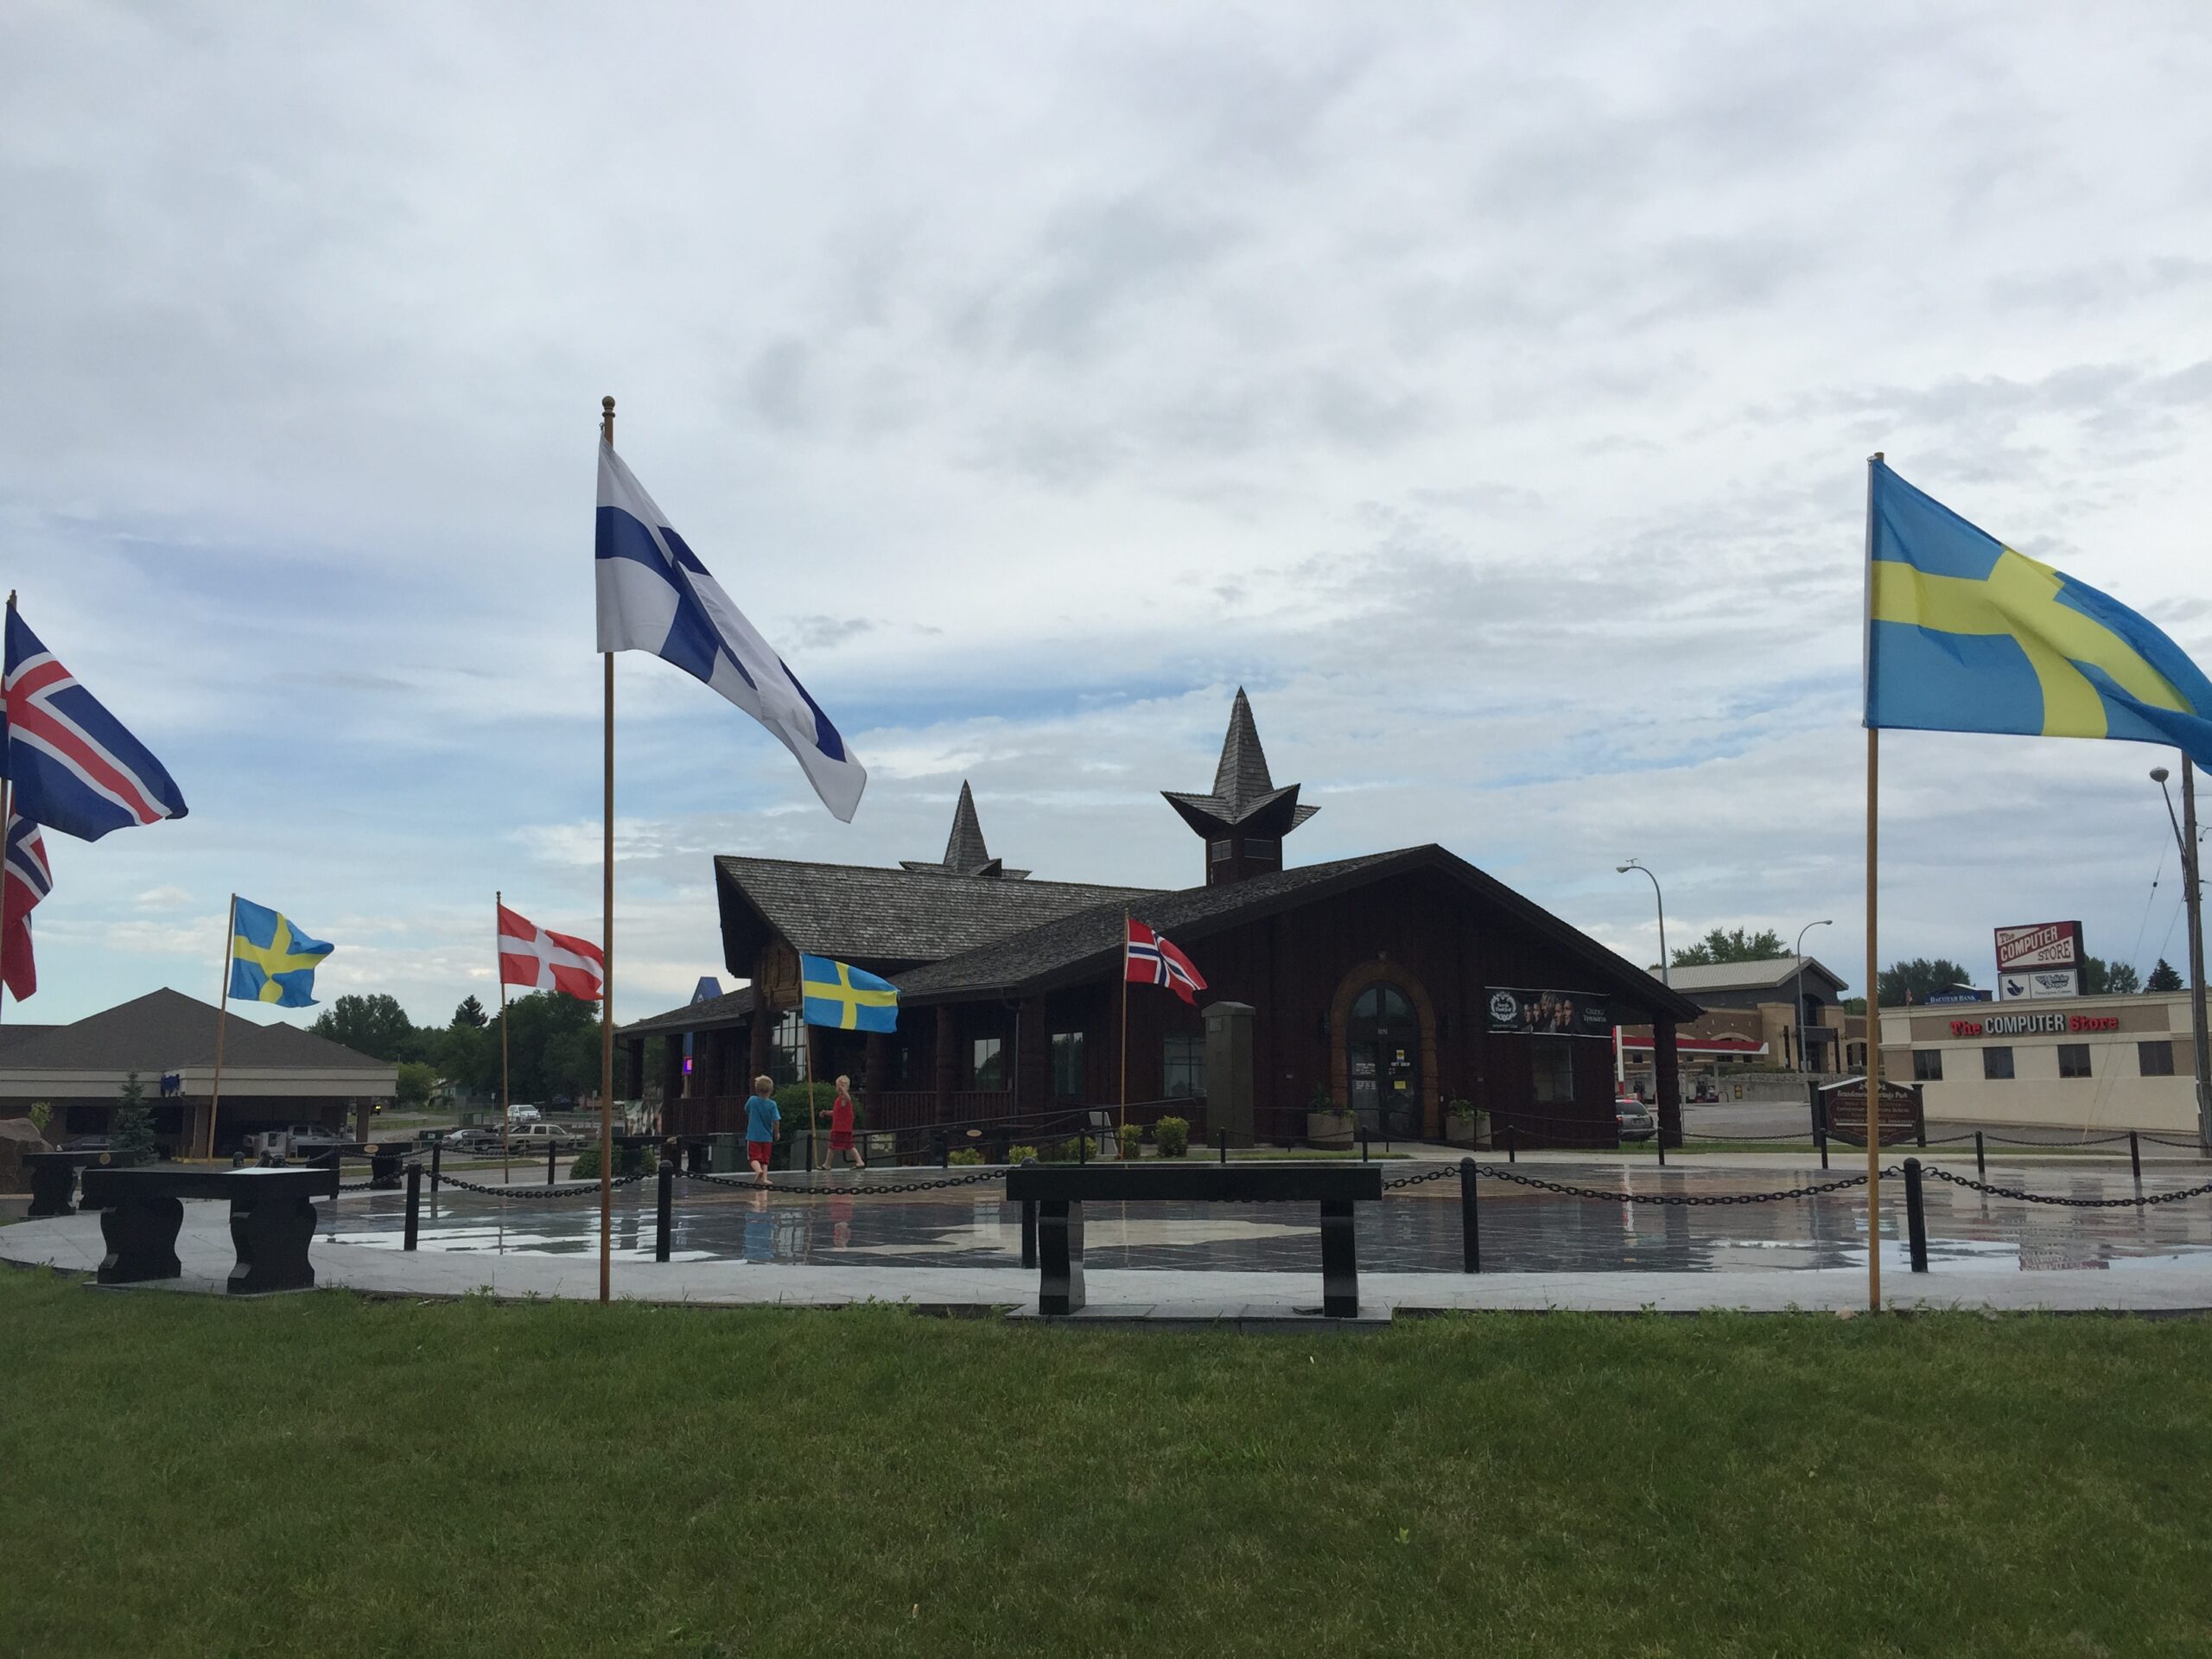 Scandinavian Plaza with flags from Sweden, Finland, Denmark, Norway and Iceland.